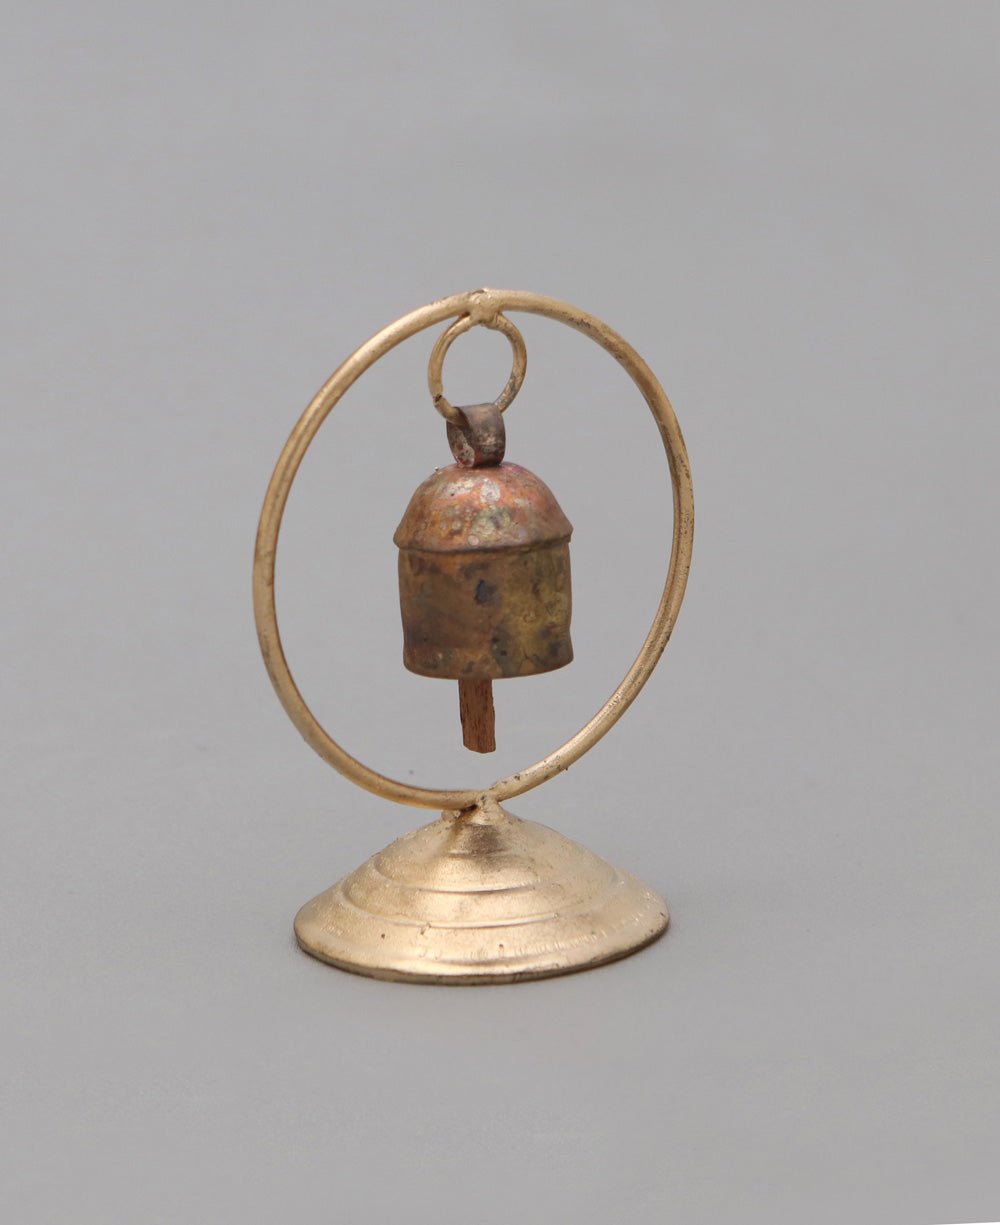 Fair Trade Tabletop Temple Bell - Hand Bells & Chimes